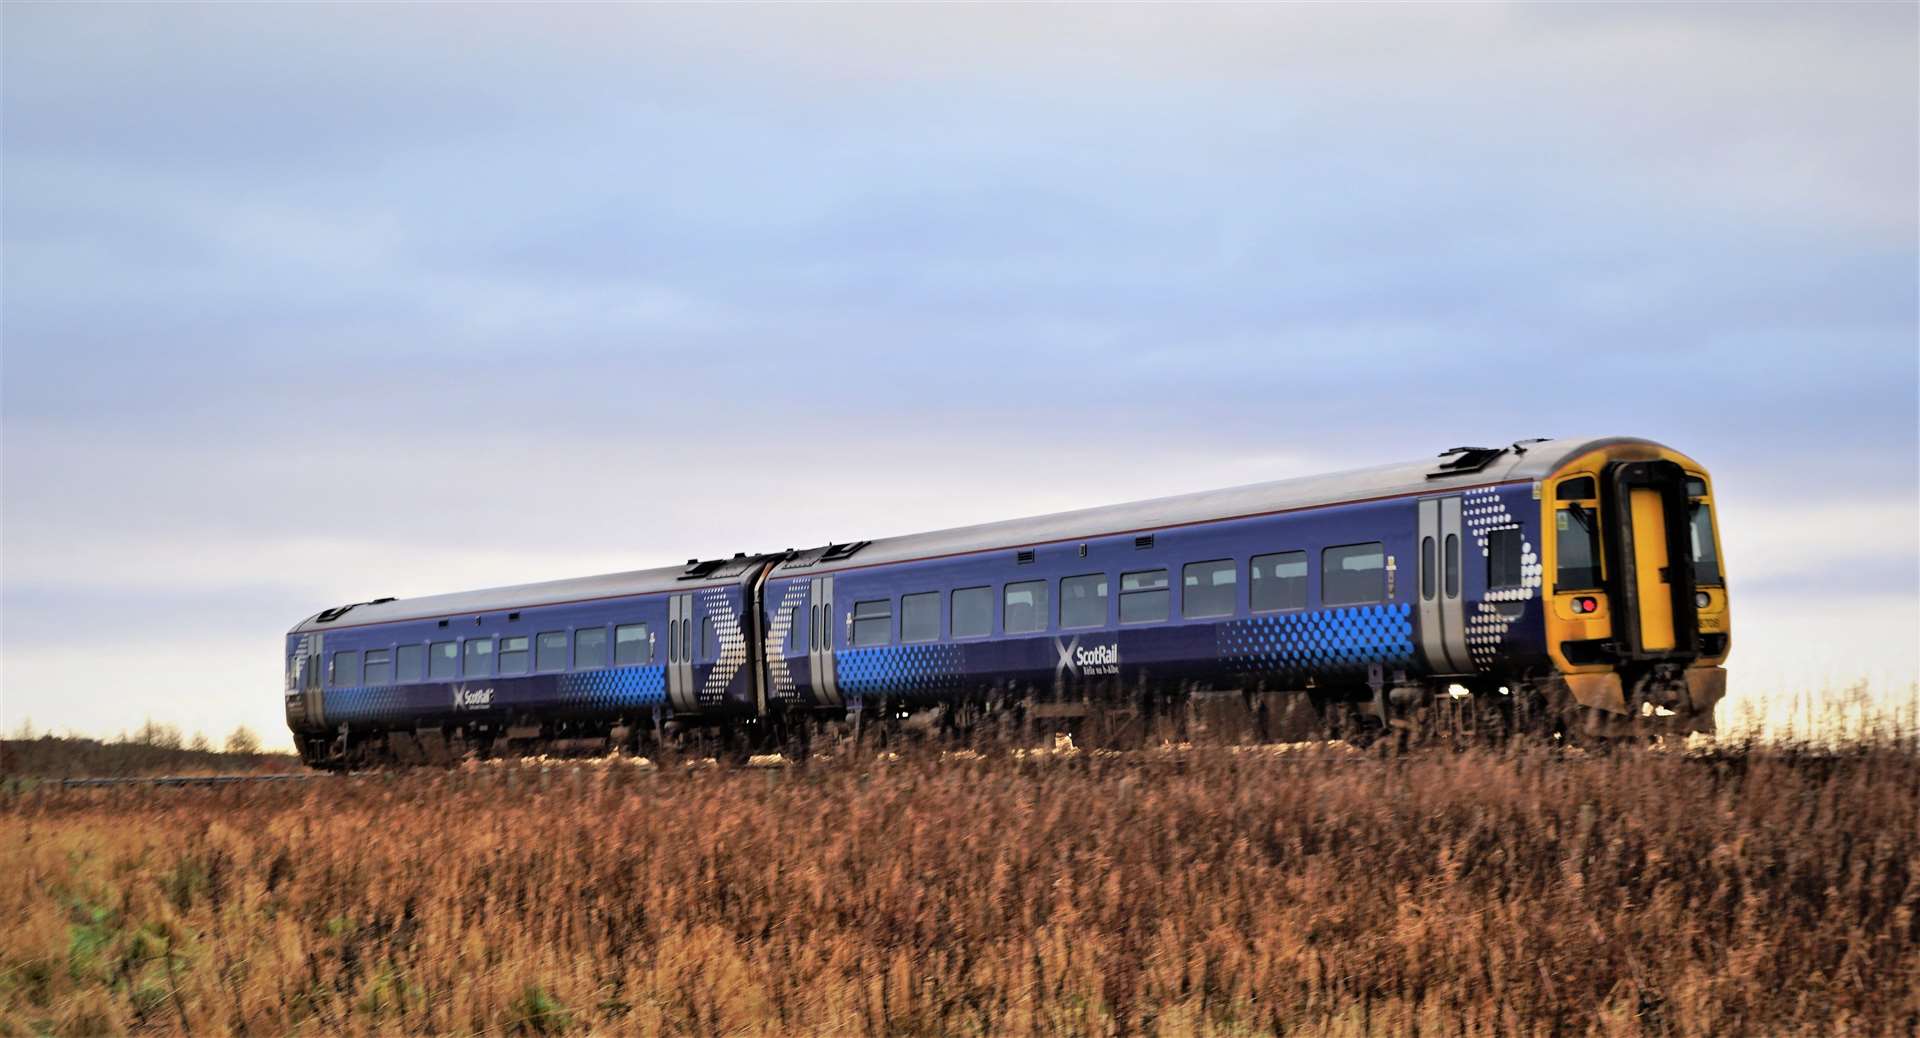 Some rail passengers were asked to get off the crowded Inverness to Ardgay train before it set off. Picture: DGS.